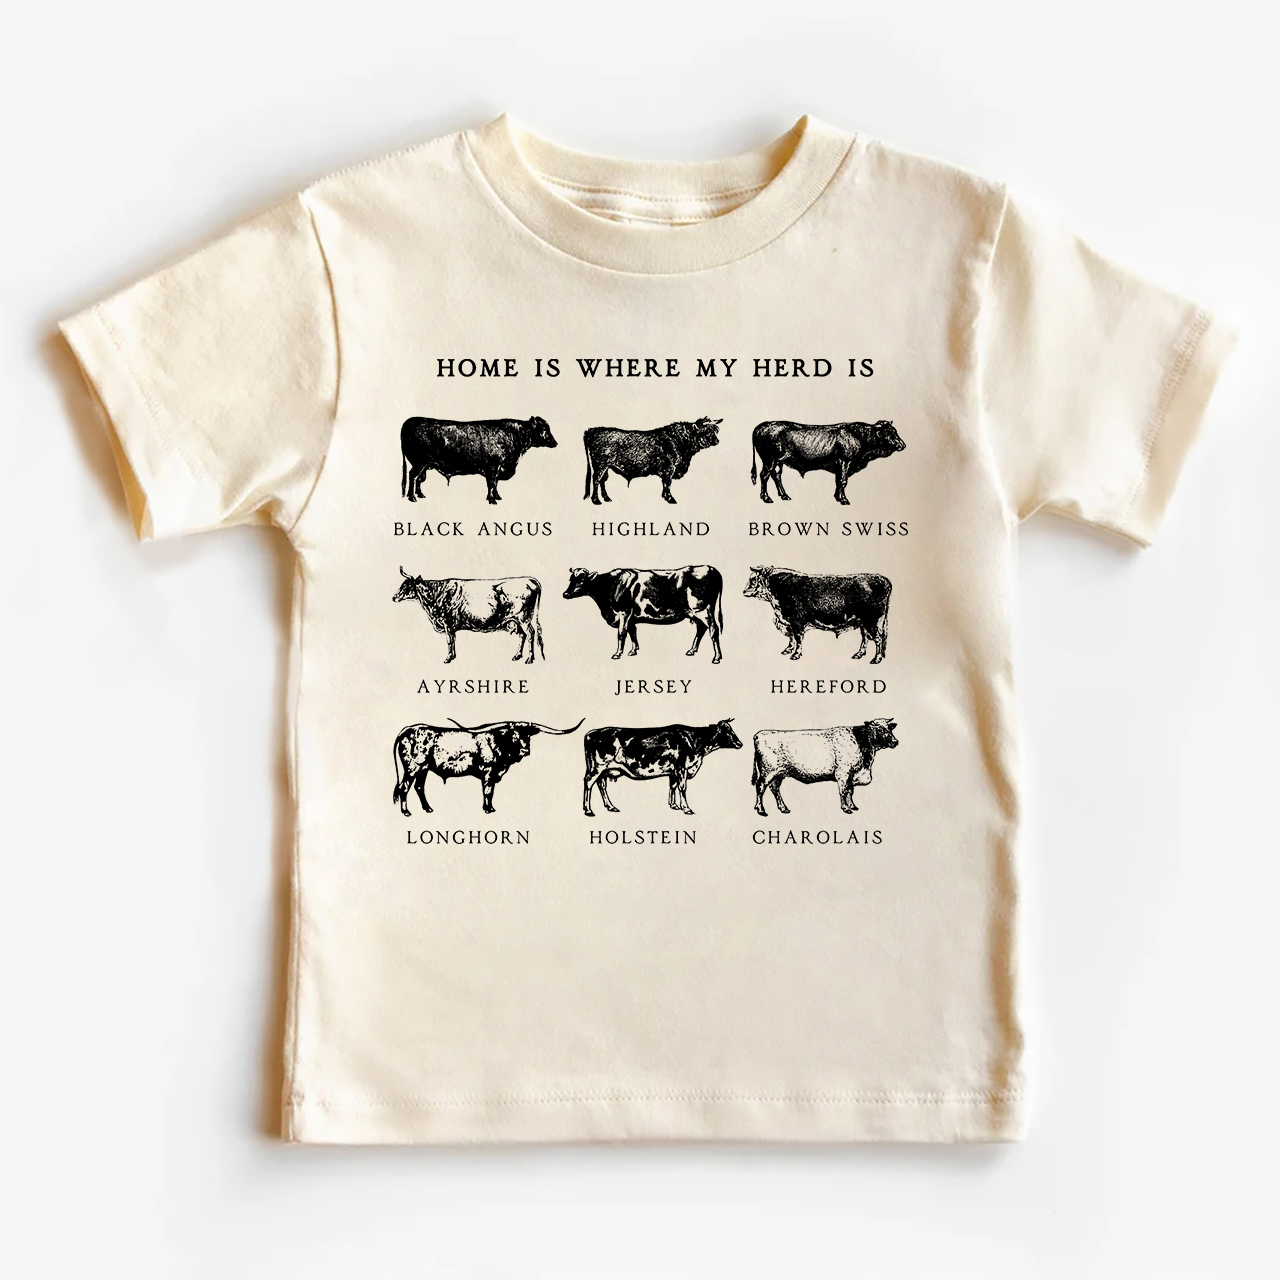 Home is Where my Herd Is Kids Shirt